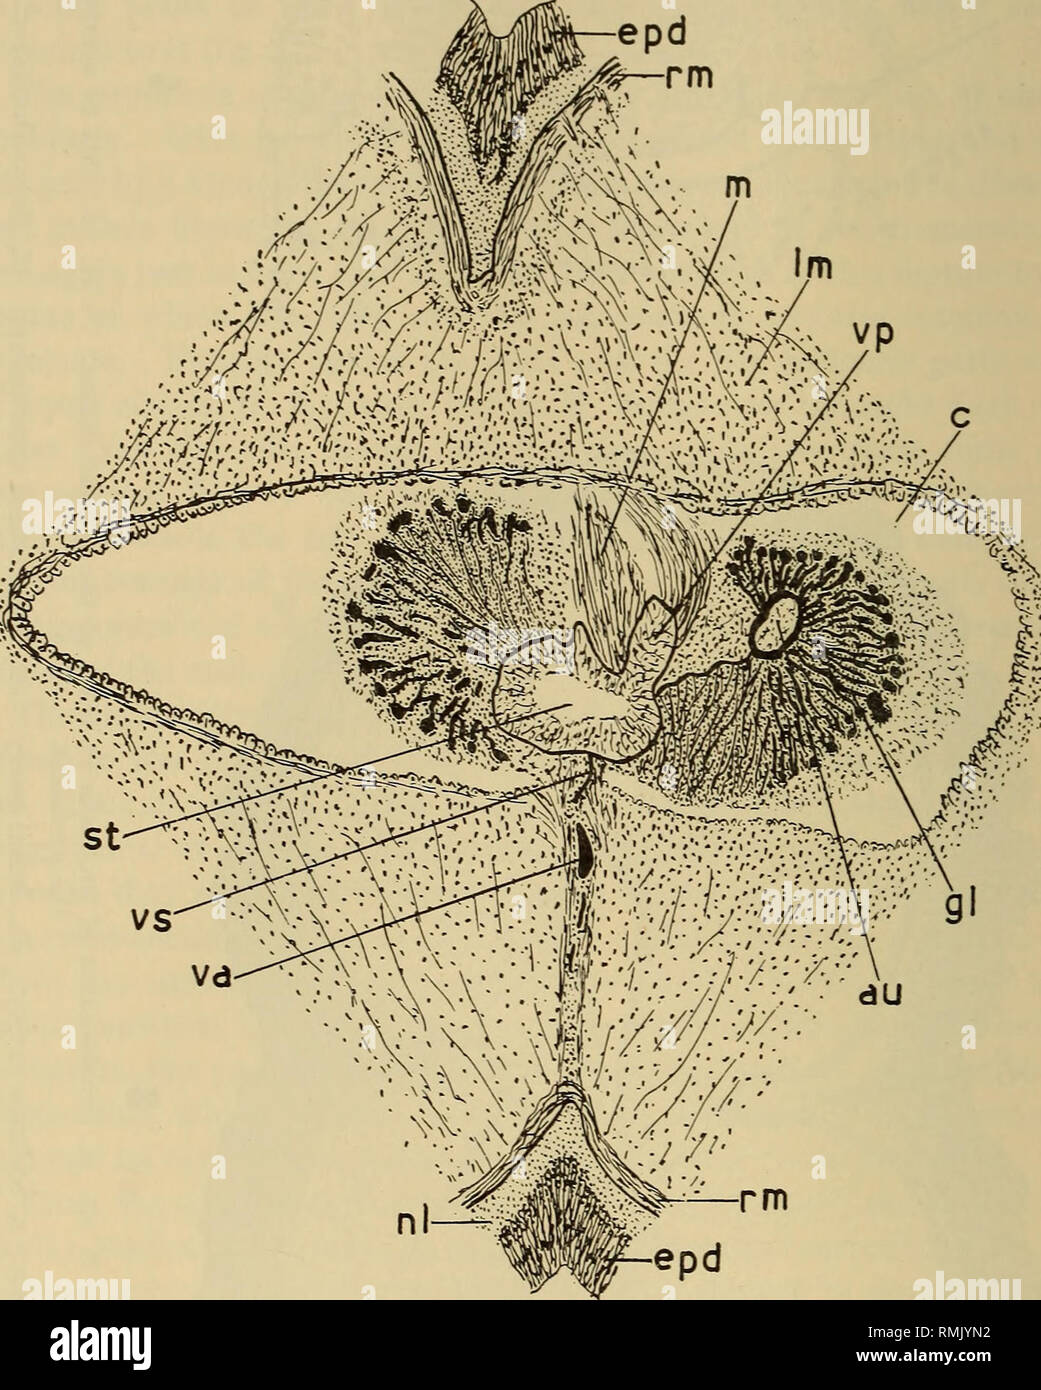 . Annals of the South African Museum = Annale van die Suid-Afrikaanse Museum. Natural history. 300 Annals of the South African Museum. septum runs from the top of the stomochord to the epidermis in a ventro-caudal direction. Probably on account of this the ventral. Fig. 5.—Willeyia delagoensis n. sp. Cross-section of anterior part of the central organs of proboscis, x 55. au, auricle of pericardium, c, coelomic cavity, epd, epidermis, gl, glomerulus. Im, longitudinal musculature, m, dorso-ventral muscle fibres. nl, nerve-fibre layer, rm, ring musculature, st, stomochord. va, ventral proboscis  Stock Photo